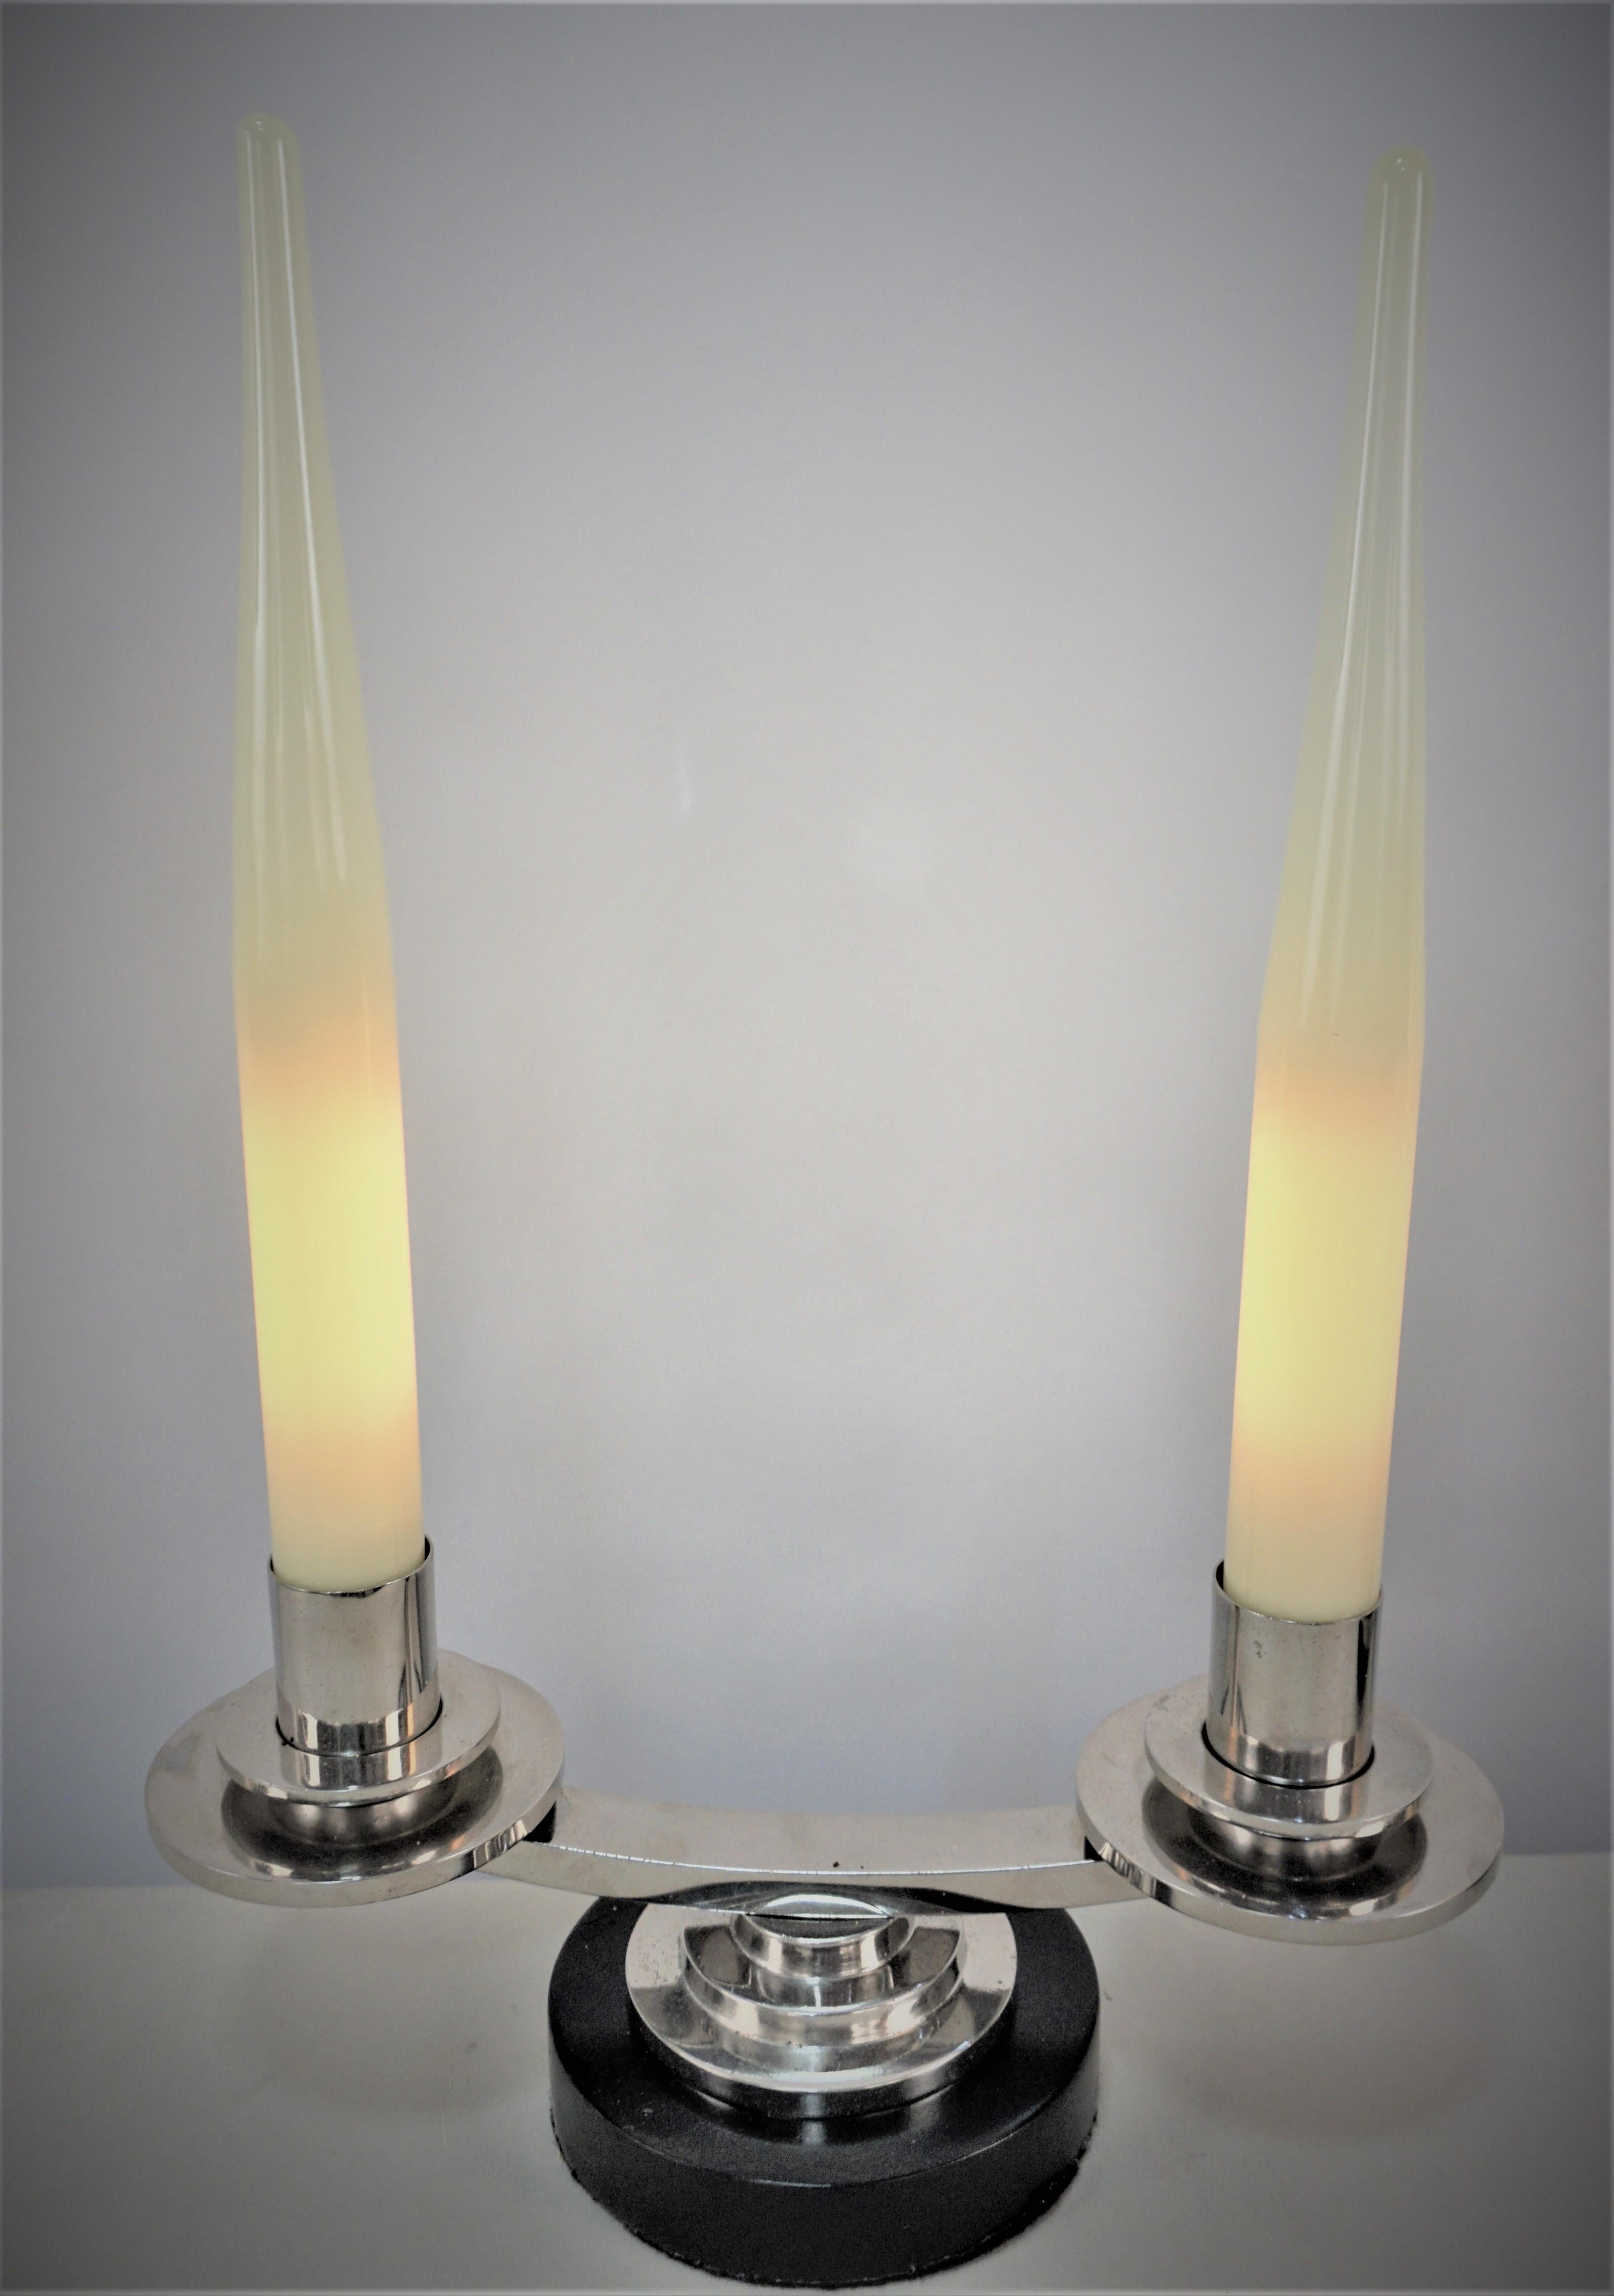 Pair of double arms simple but elegant nickel on bronze with lacquer wood base candelabra lamps.
These candelabra lamps designed with candle shape glass that covers each light bulb.